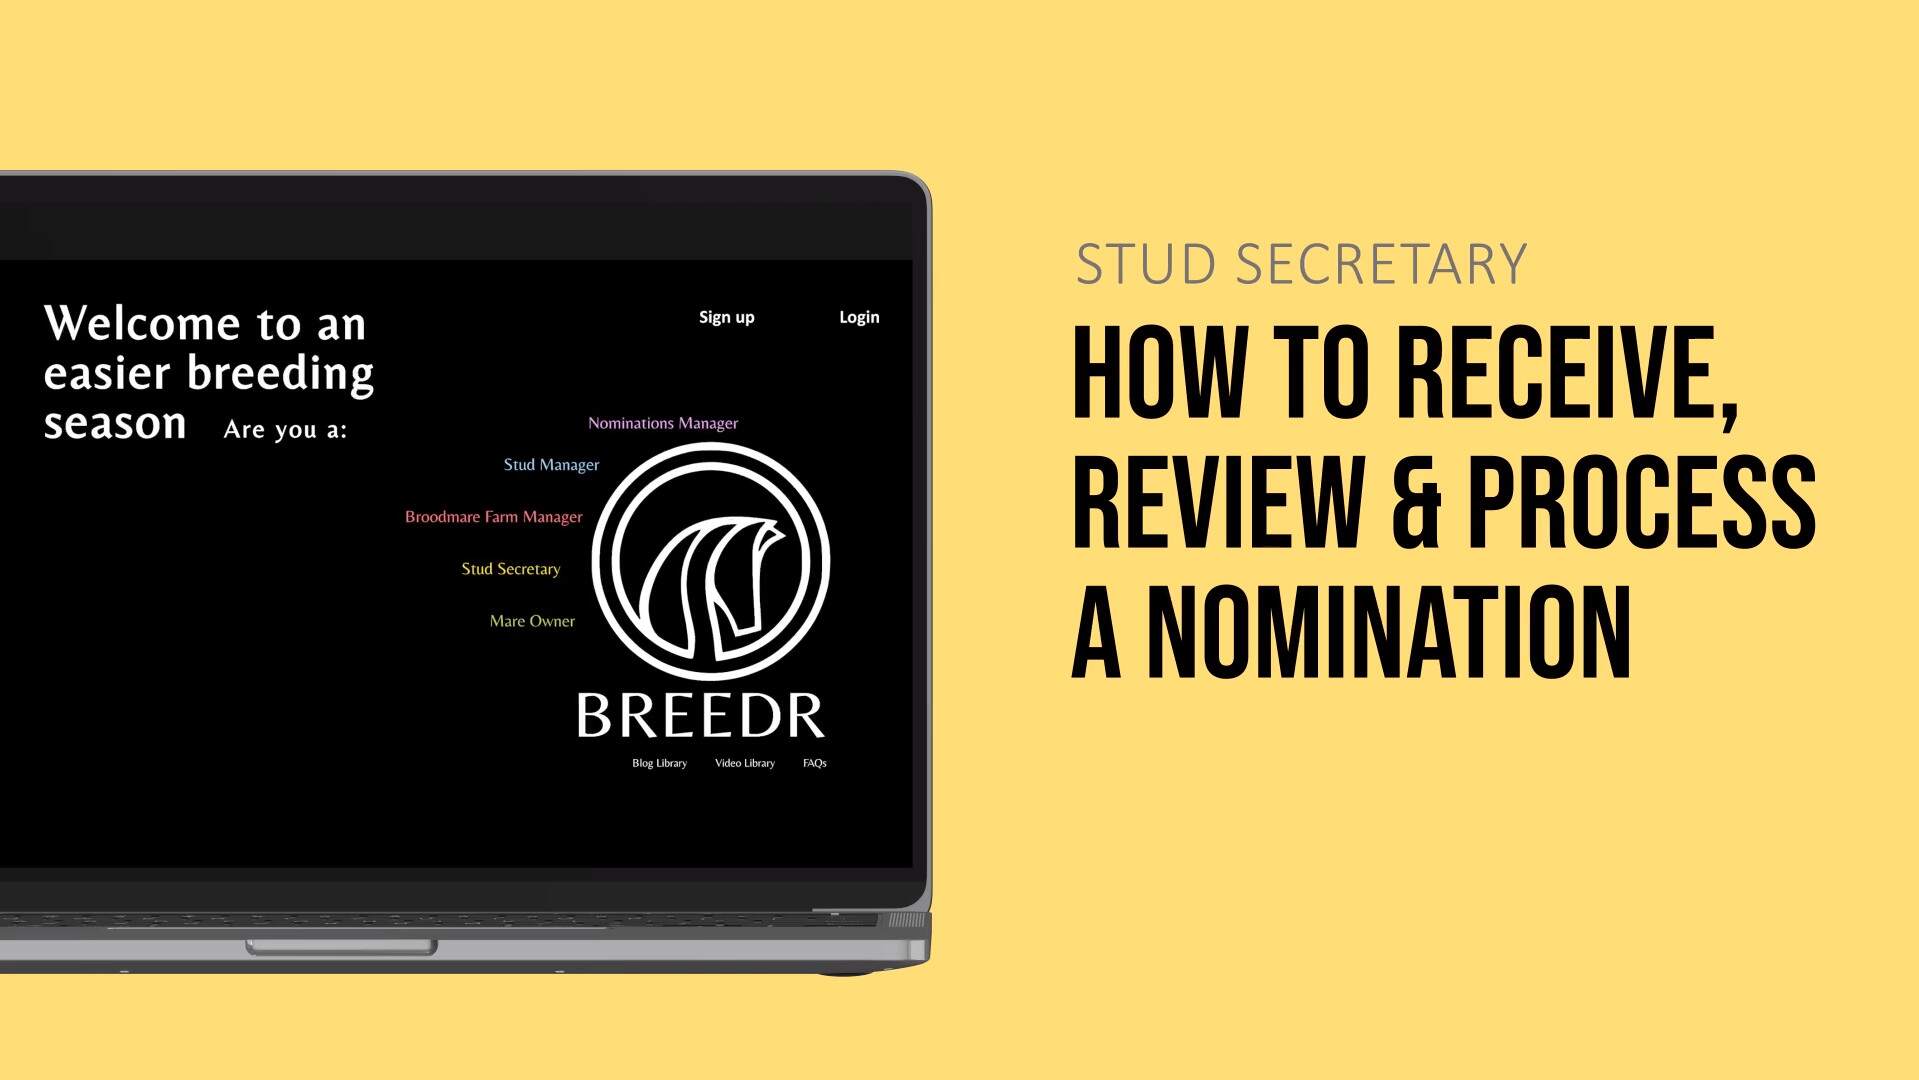 Stud Secretary How to receive review process a nomination